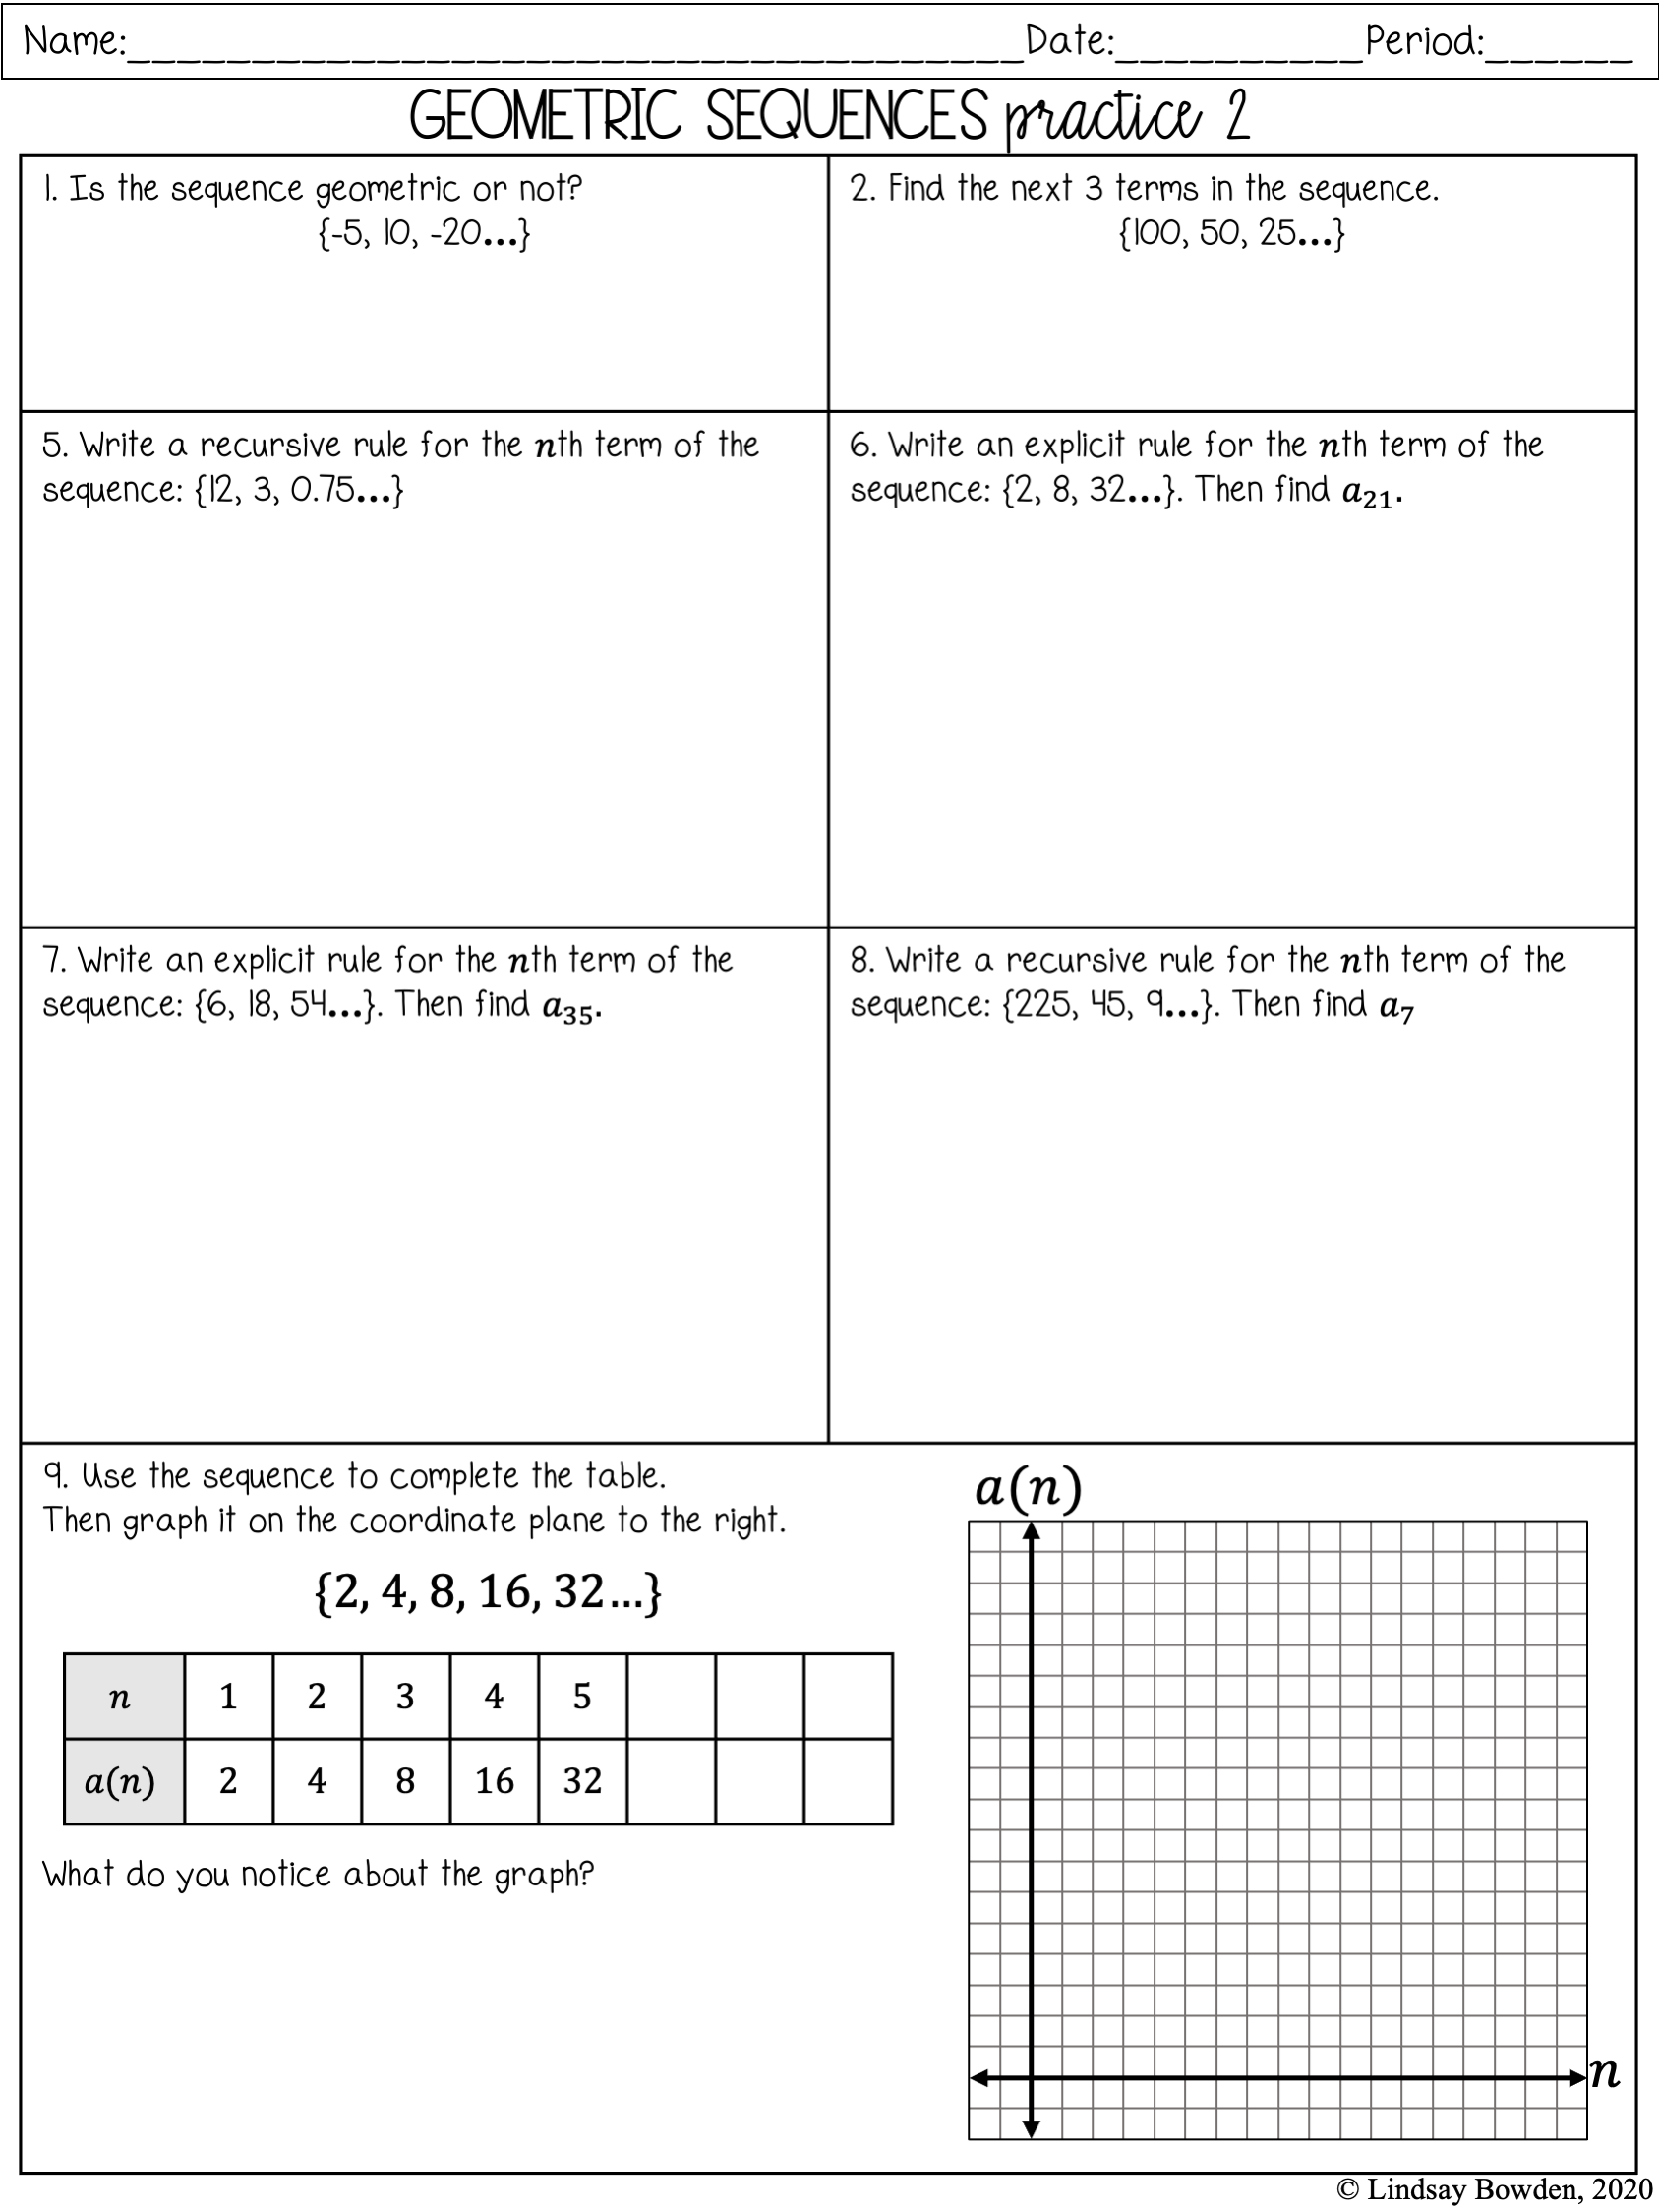 Geometric Sequences Notes and Worksheets - Lindsay Bowden Intended For Geometric Sequence Worksheet Answers